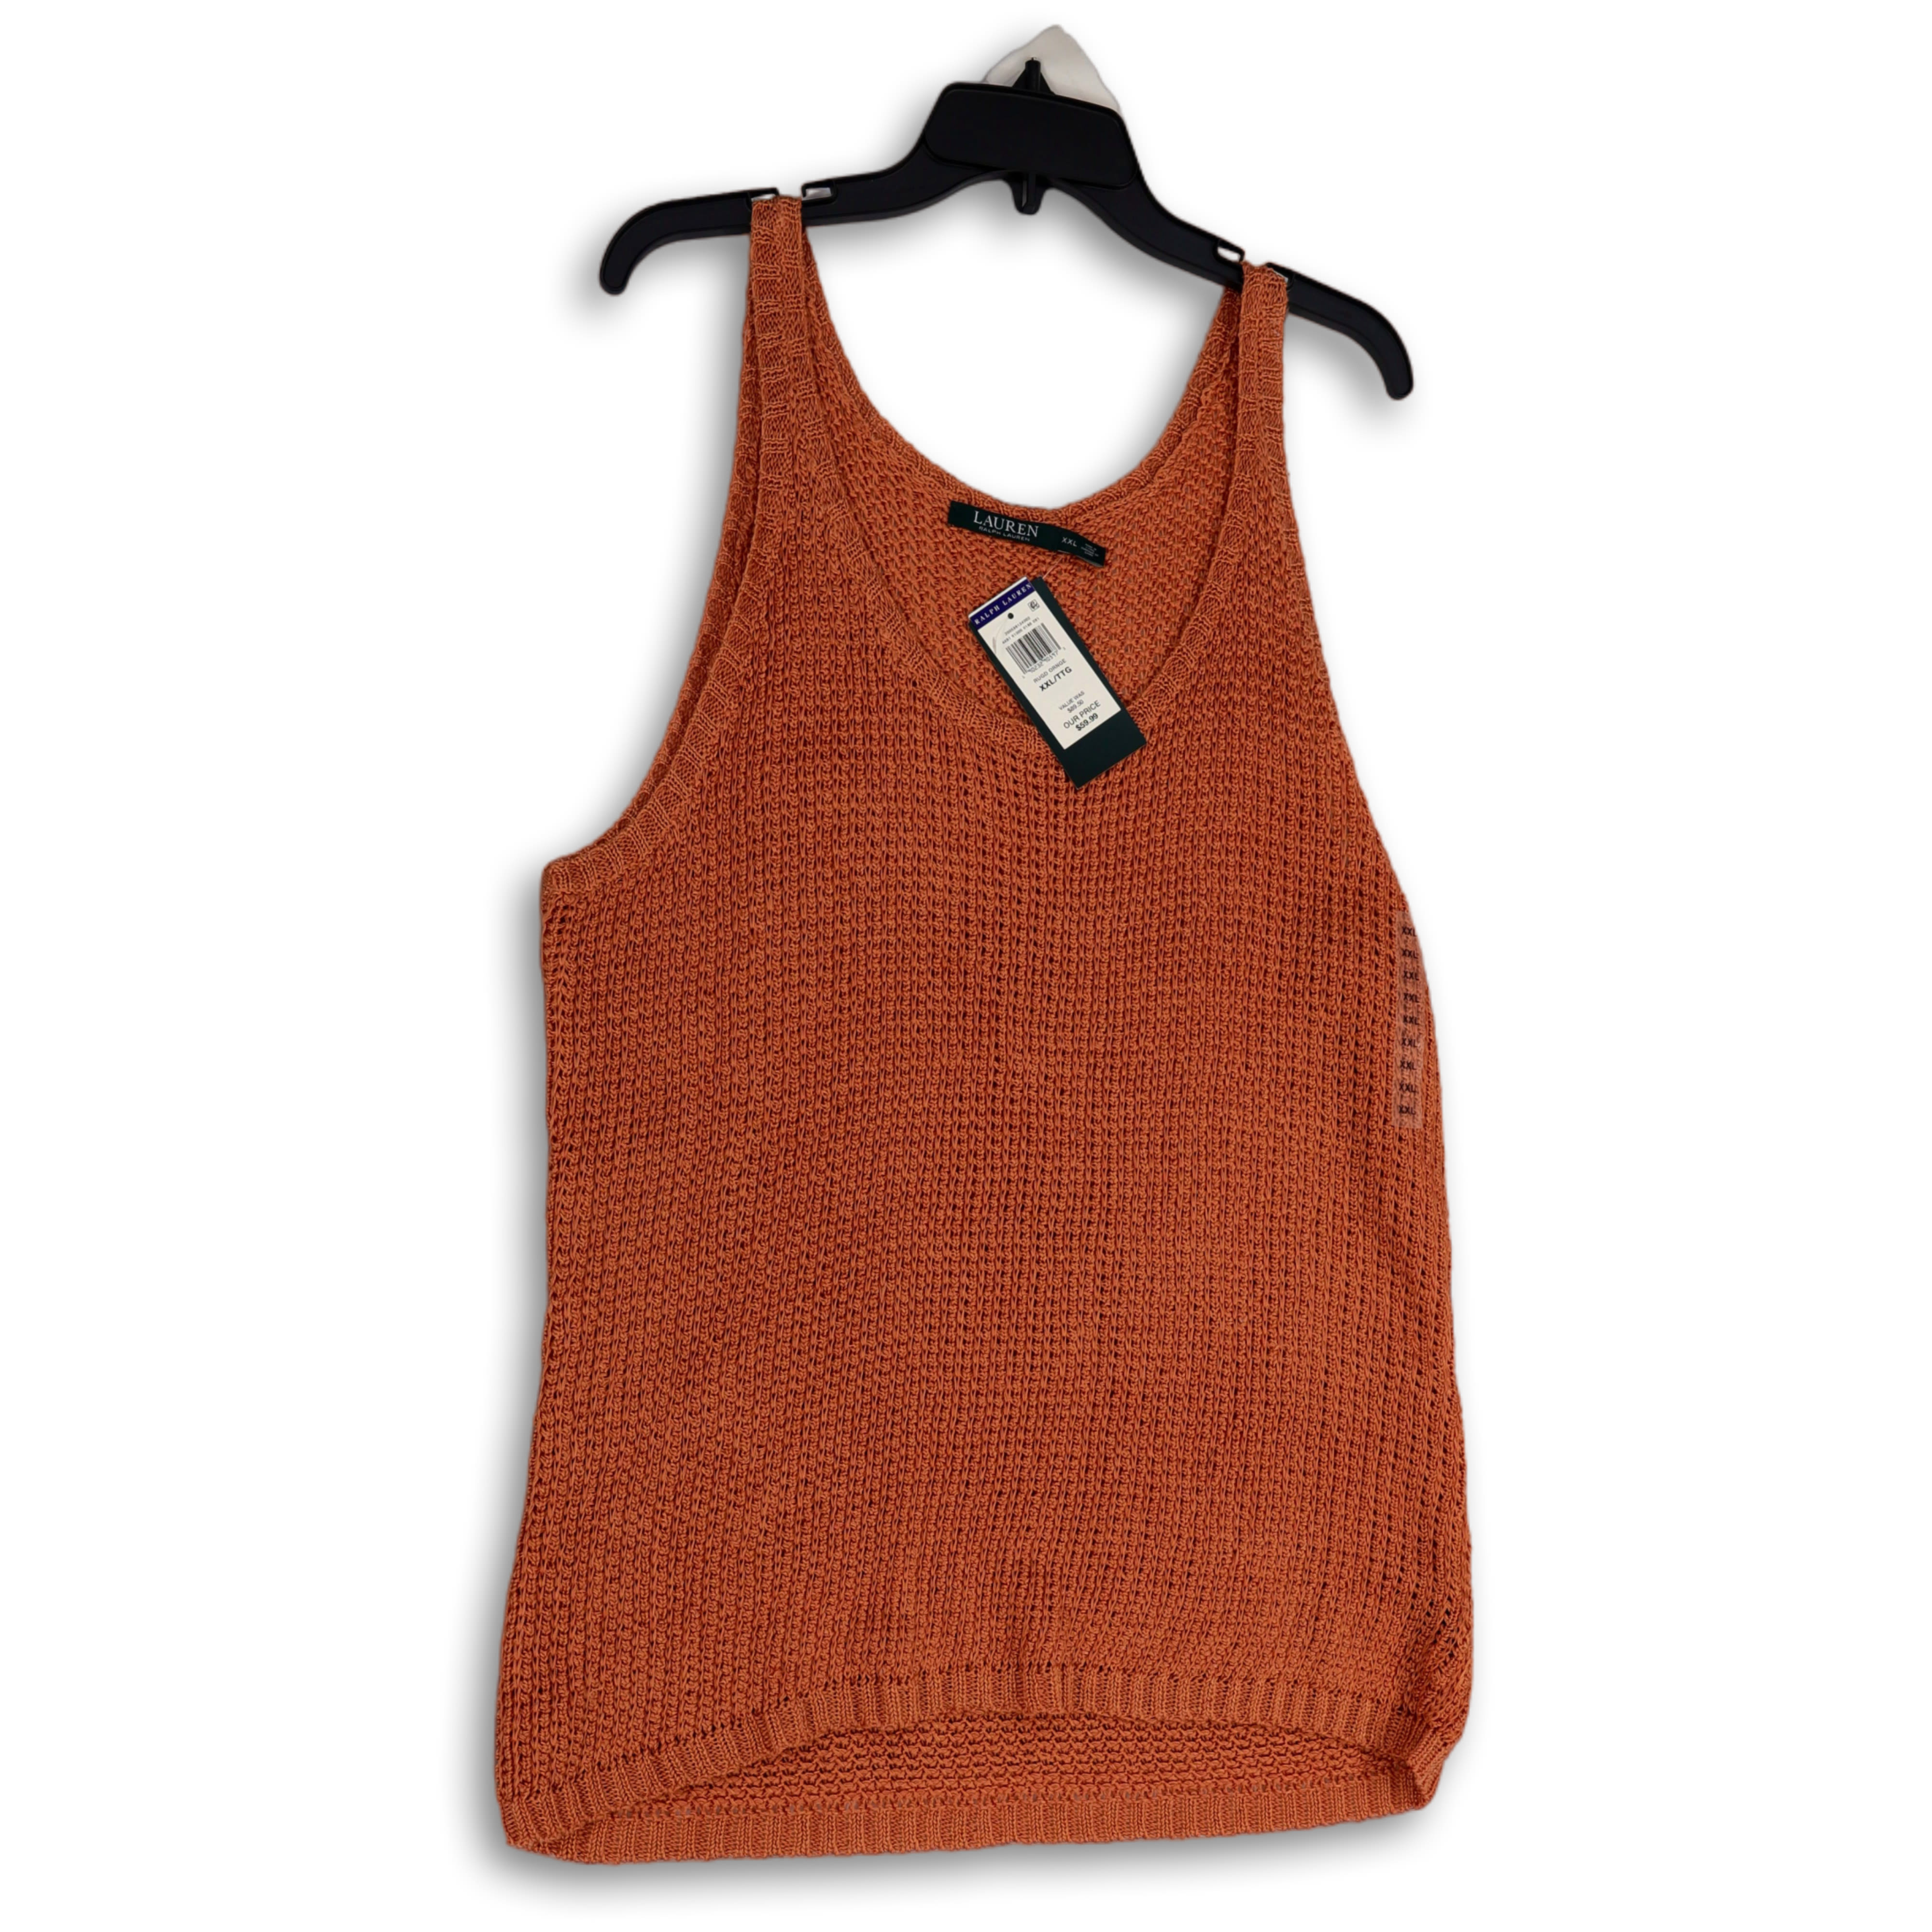 Buy the NWT Womens Orange Scoop Neck Sleeveless Knitted Pullover